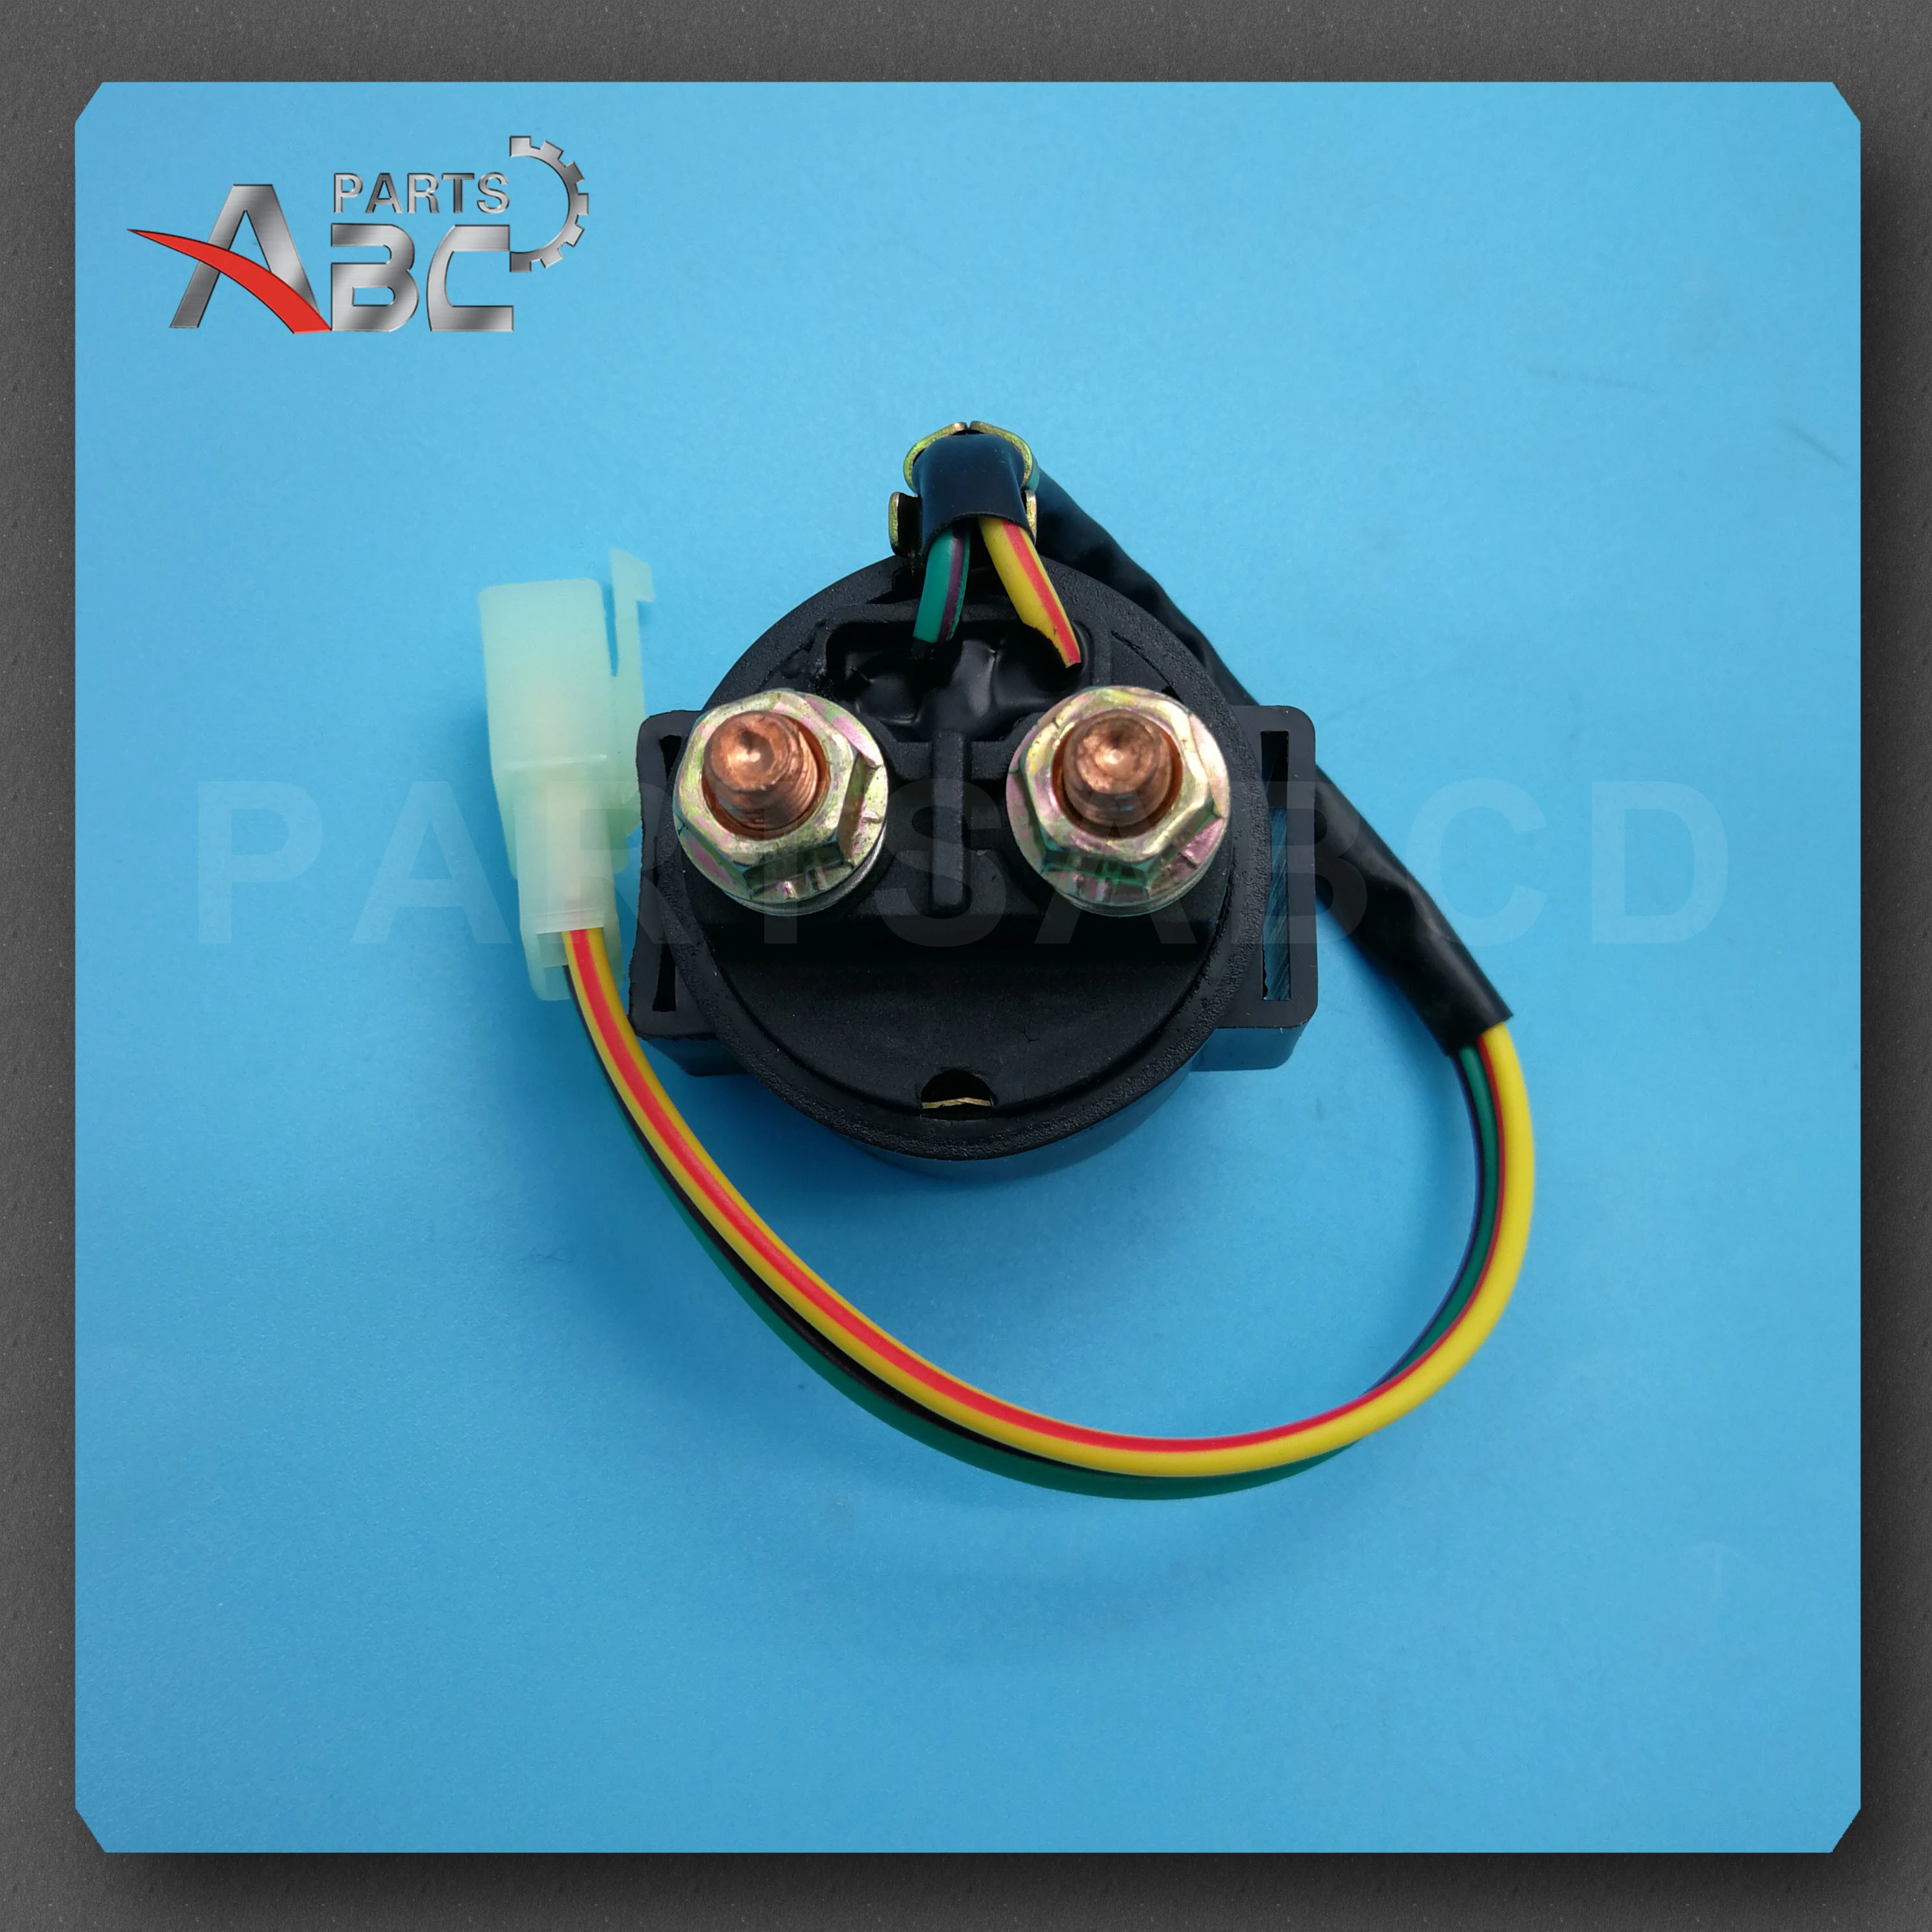 Solenoid Starter Relay Replacement For GY6 50cc 125cc 150cc 250cc 2 Pin ATV Pocket Bike Scooter Engine